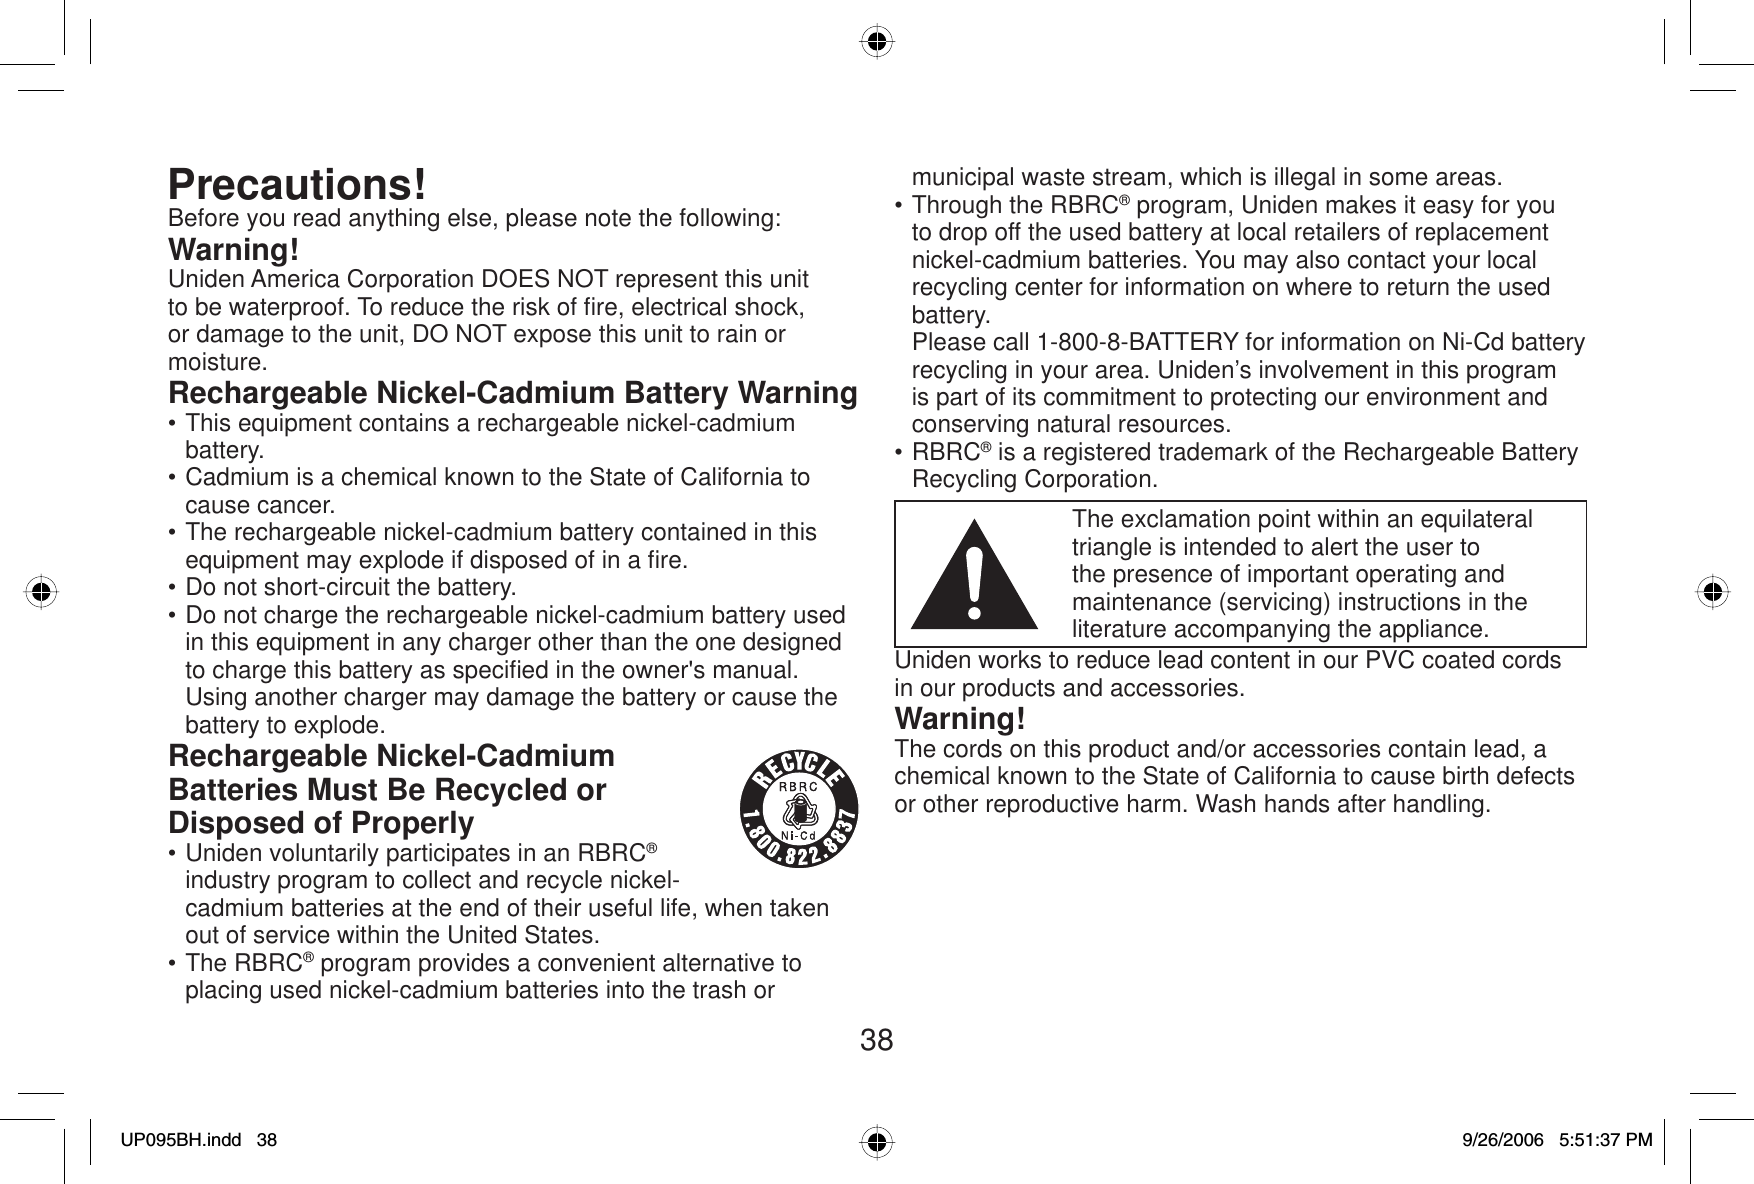 38Precautions!Before you read anything else, please note the following:Warning!Uniden America Corporation DOES NOT represent this unit to be waterproof. To reduce the risk of ﬁ re, electrical shock, or damage to the unit, DO NOT expose this unit to rain or moisture.Rechargeable Nickel-Cadmium Battery Warning• This equipment contains a rechargeable nickel-cadmium battery.• Cadmium is a chemical known to the State of California to cause cancer.• The rechargeable nickel-cadmium battery contained in this equipment may explode if disposed of in a ﬁ re.• Do not short-circuit the battery.• Do not charge the rechargeable nickel-cadmium battery used in this equipment in any charger other than the one designed to charge this battery as speciﬁ ed in the owner&apos;s manual. Using another charger may damage the battery or cause the battery to explode.Rechargeable Nickel-Cadmium Batteries Must Be Recycled or Disposed of Properly• Uniden voluntarily participates in an RBRC®industry program to collect and recycle nickel-cadmium batteries at the end of their useful life, when taken out of service within the United States.• The RBRC® program provides a convenient alternative to placing used nickel-cadmium batteries into the trash or municipal waste stream, which is illegal in some areas.• Through the RBRC® program, Uniden makes it easy for you to drop off the used battery at local retailers of replacement nickel-cadmium batteries. You may also contact your local recycling center for information on where to return the used battery.  Please call 1-800-8-BATTERY for information on Ni-Cd battery recycling in your area. Uniden’s involvement in this program is part of its commitment to protecting our environment and conserving natural resources.• RBRC® is a registered trademark of the Rechargeable Battery Recycling Corporation.The exclamation point within an equilateral triangle is intended to alert the user to the presence of important operating and maintenance (servicing) instructions in the literature accompanying the appliance.Uniden works to reduce lead content in our PVC coated cords in our products and accessories.Warning!The cords on this product and/or accessories contain lead, a chemical known to the State of California to cause birth defects or other reproductive harm. Wash hands after handling.UP095BH.indd 38UP095BH.indd   389/26/2006 5:51:37 PM9/26/2006   5:51:37 PM